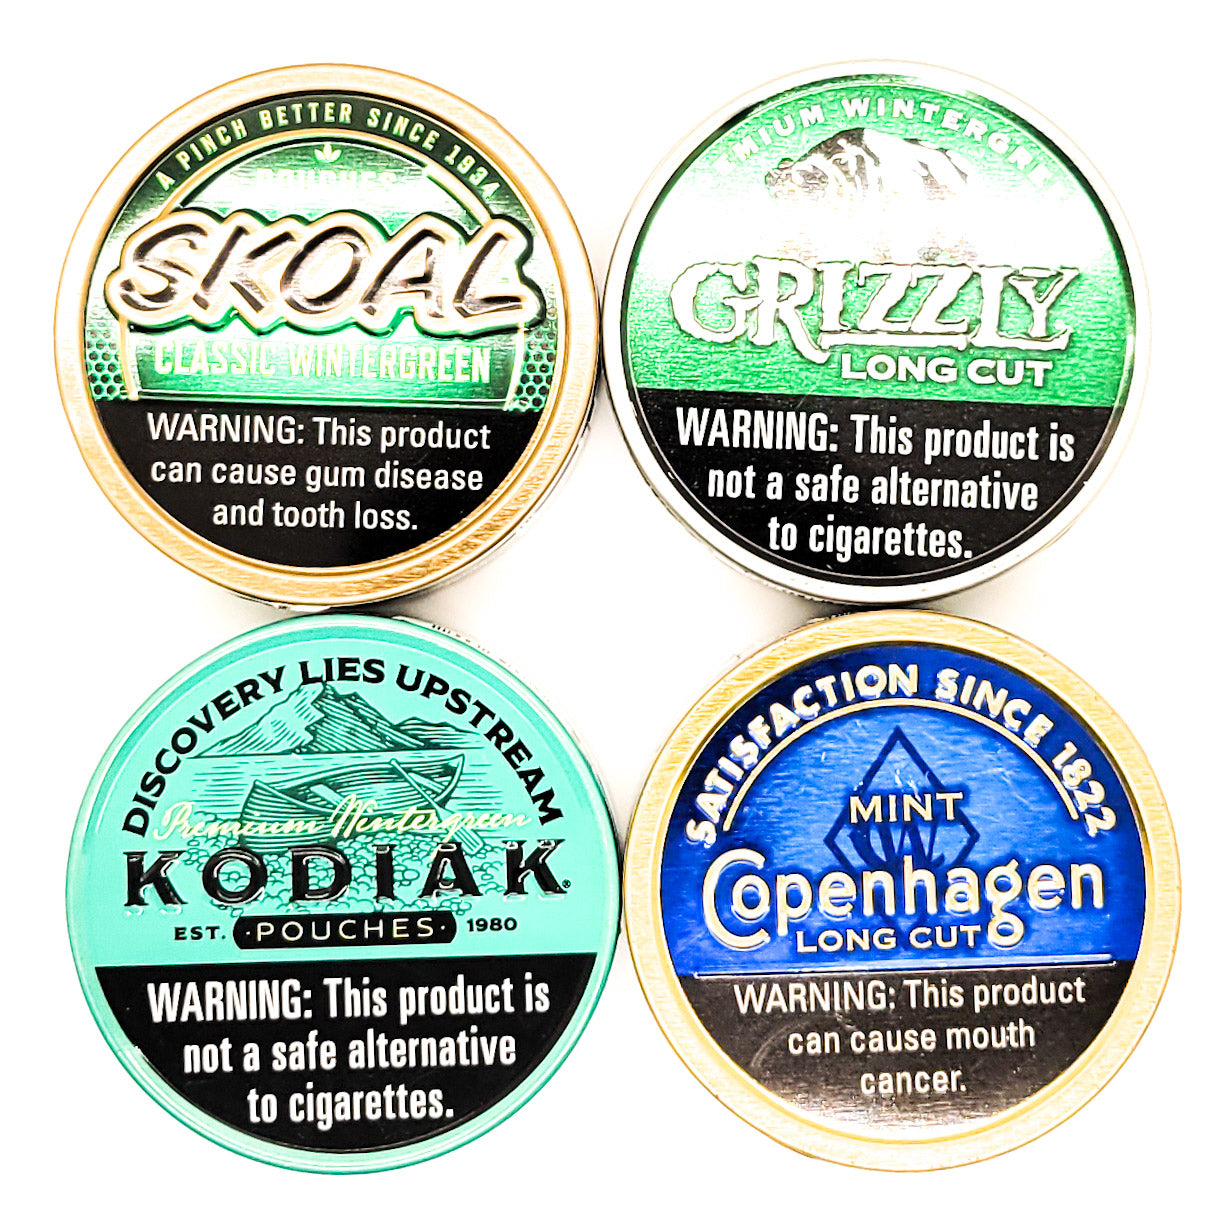 For the best Kydex dip can (or chew can) holster is designed to ride on your belt and hold your favorite adult lip candy securely, shot Four Brothers Holsters. Our Dip Can Holster is manufactured with adjustable retention and is confirmed to fit Grizzly, Skoal, Kodiak and Copenhagen chew cans. Other cans will also fit.